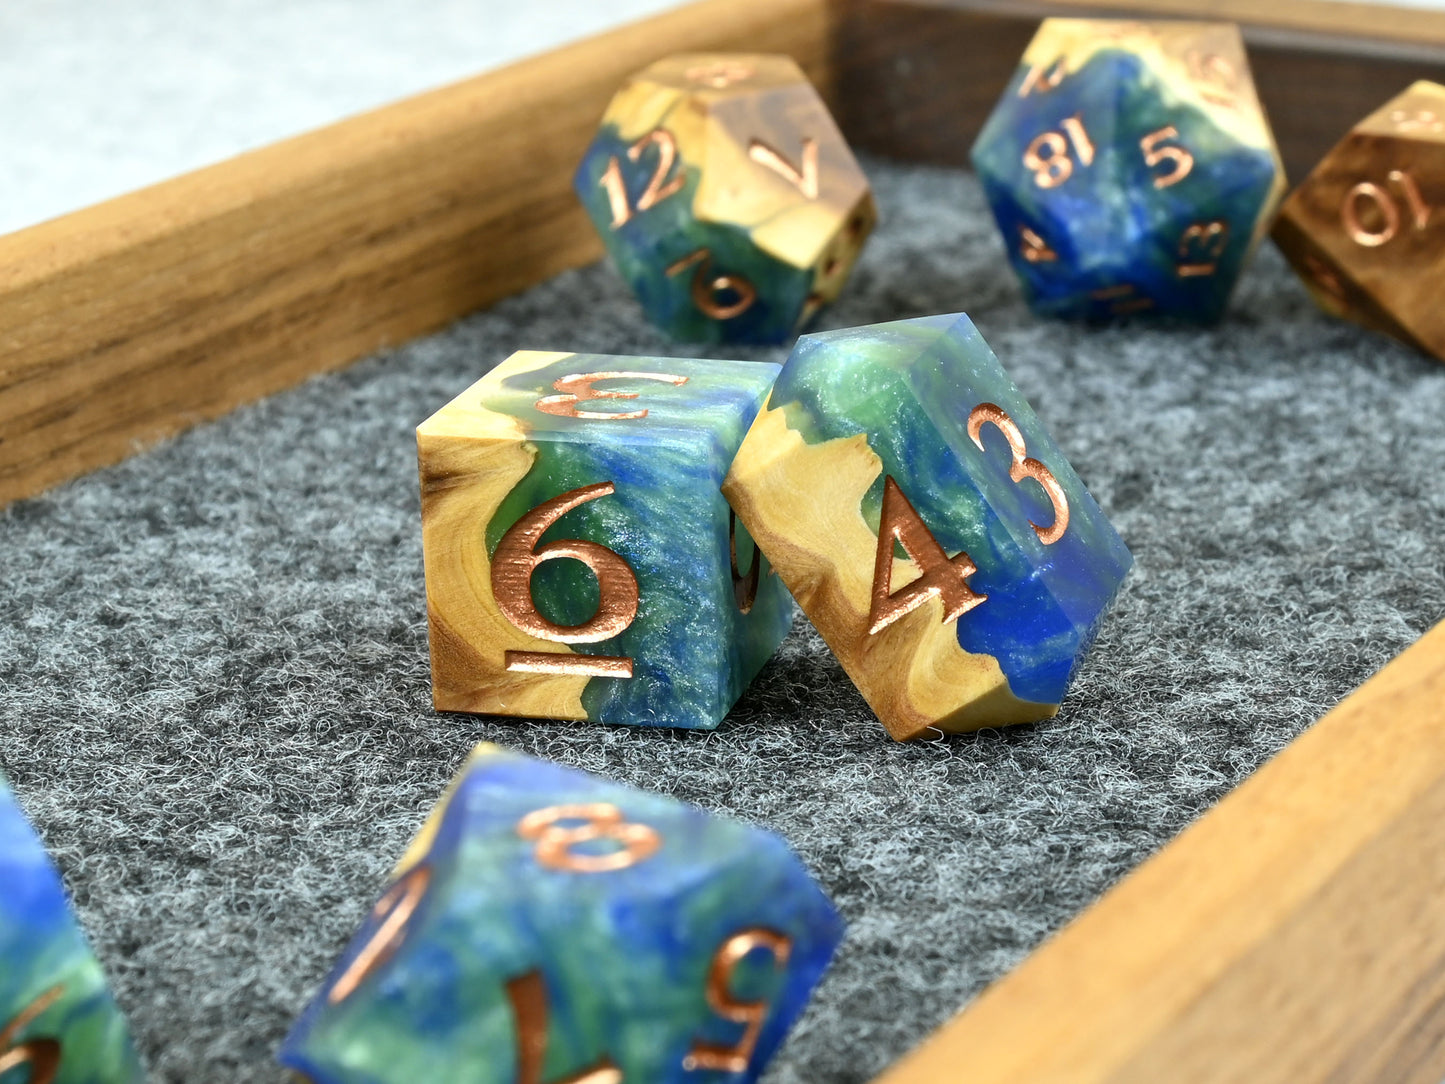 Earth magic brown mallee burl wood and resin hybrid dice set for D&D ttrpg.